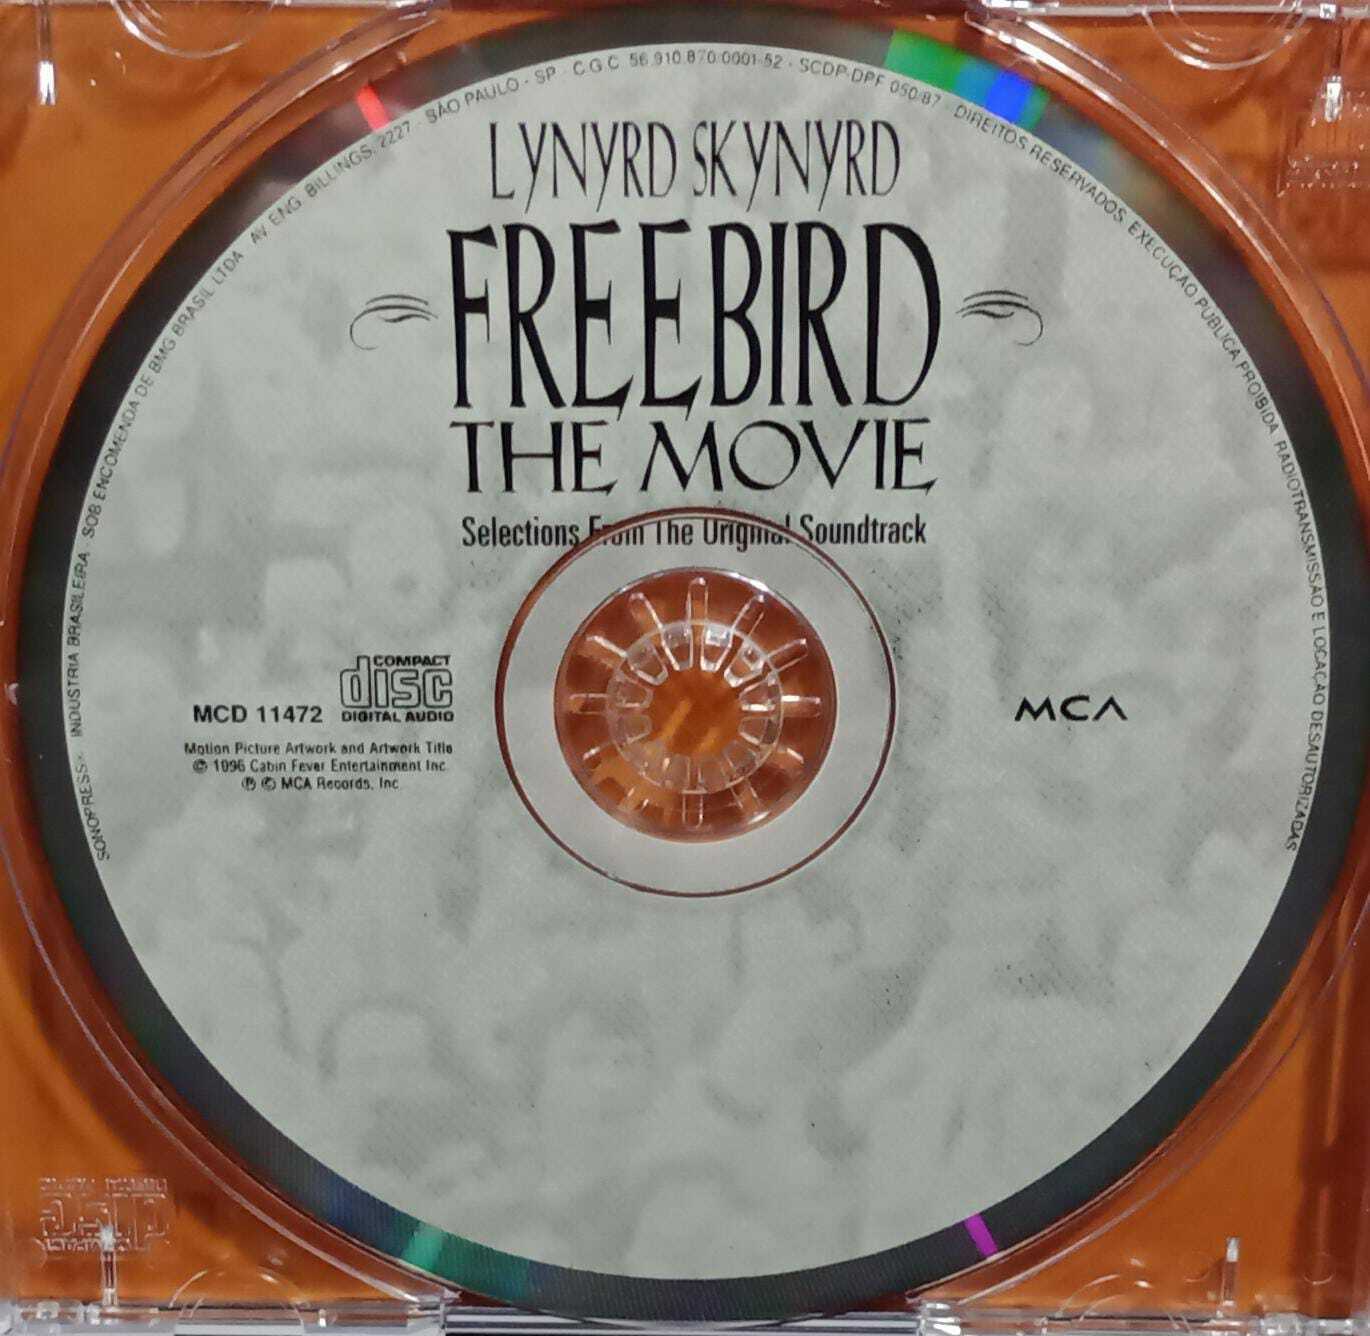 CD - Lynyrd Skynyrd - Freebird The Movie Selections From The Original Soundtrack